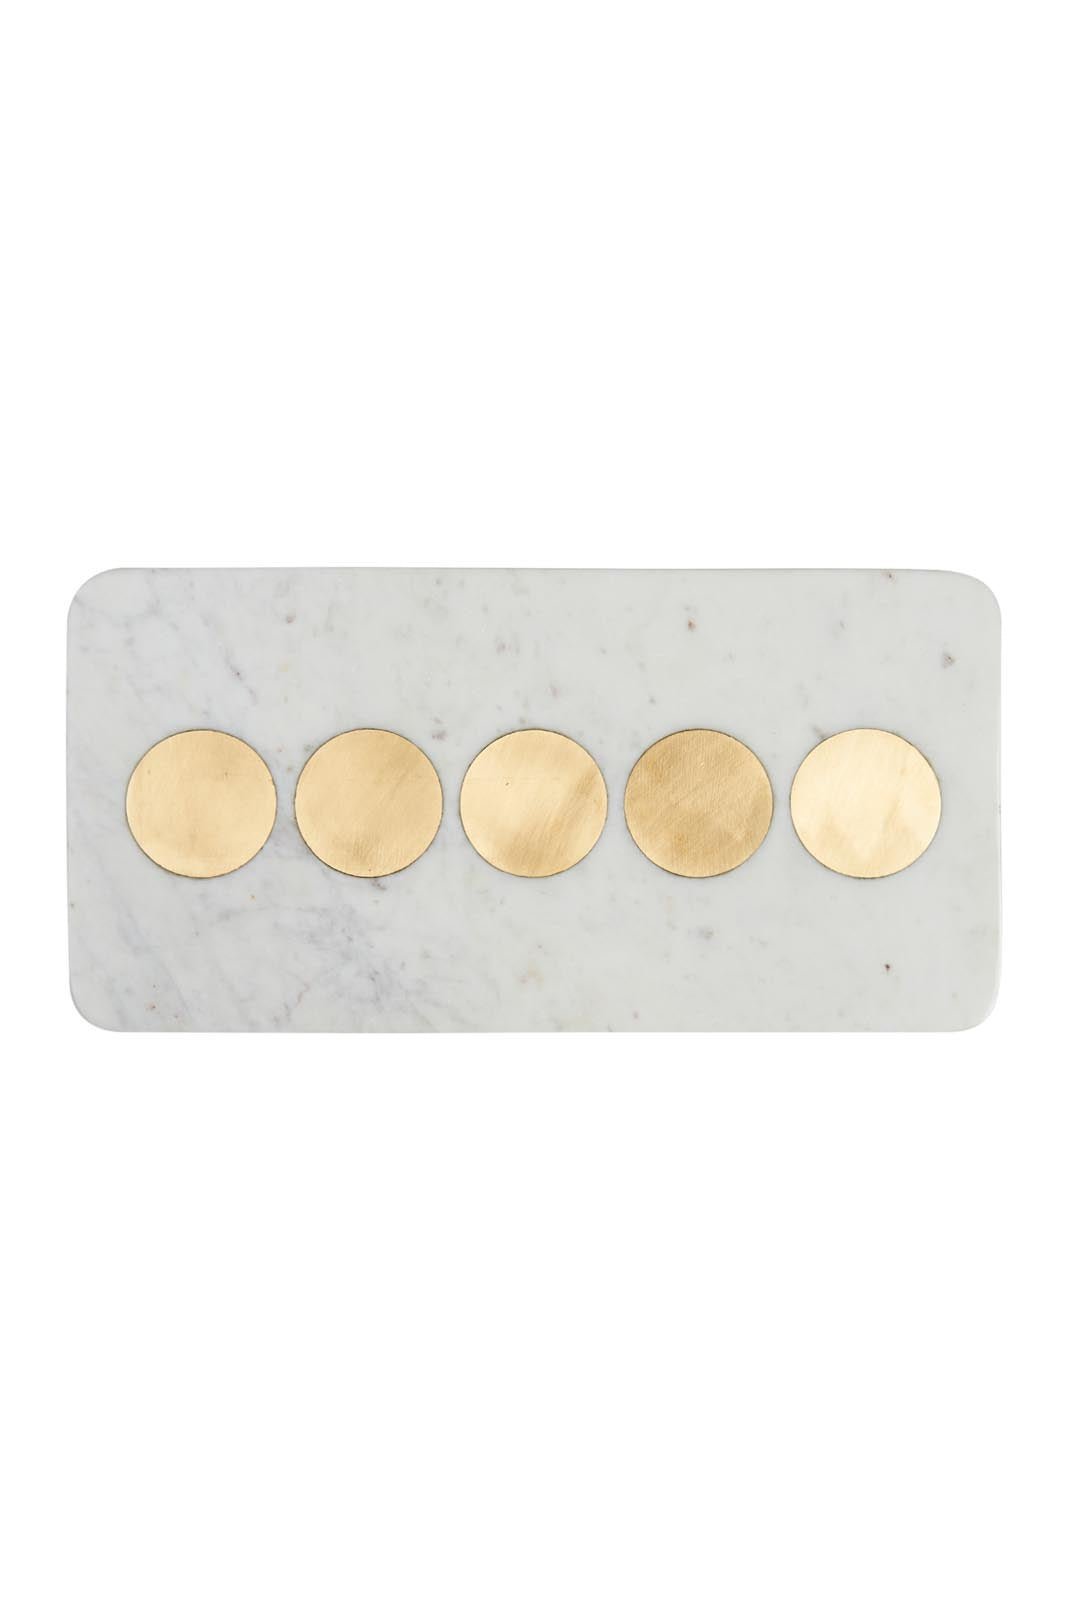 Casa Blanca Board - Gold/Marble - eb&ive Table Top